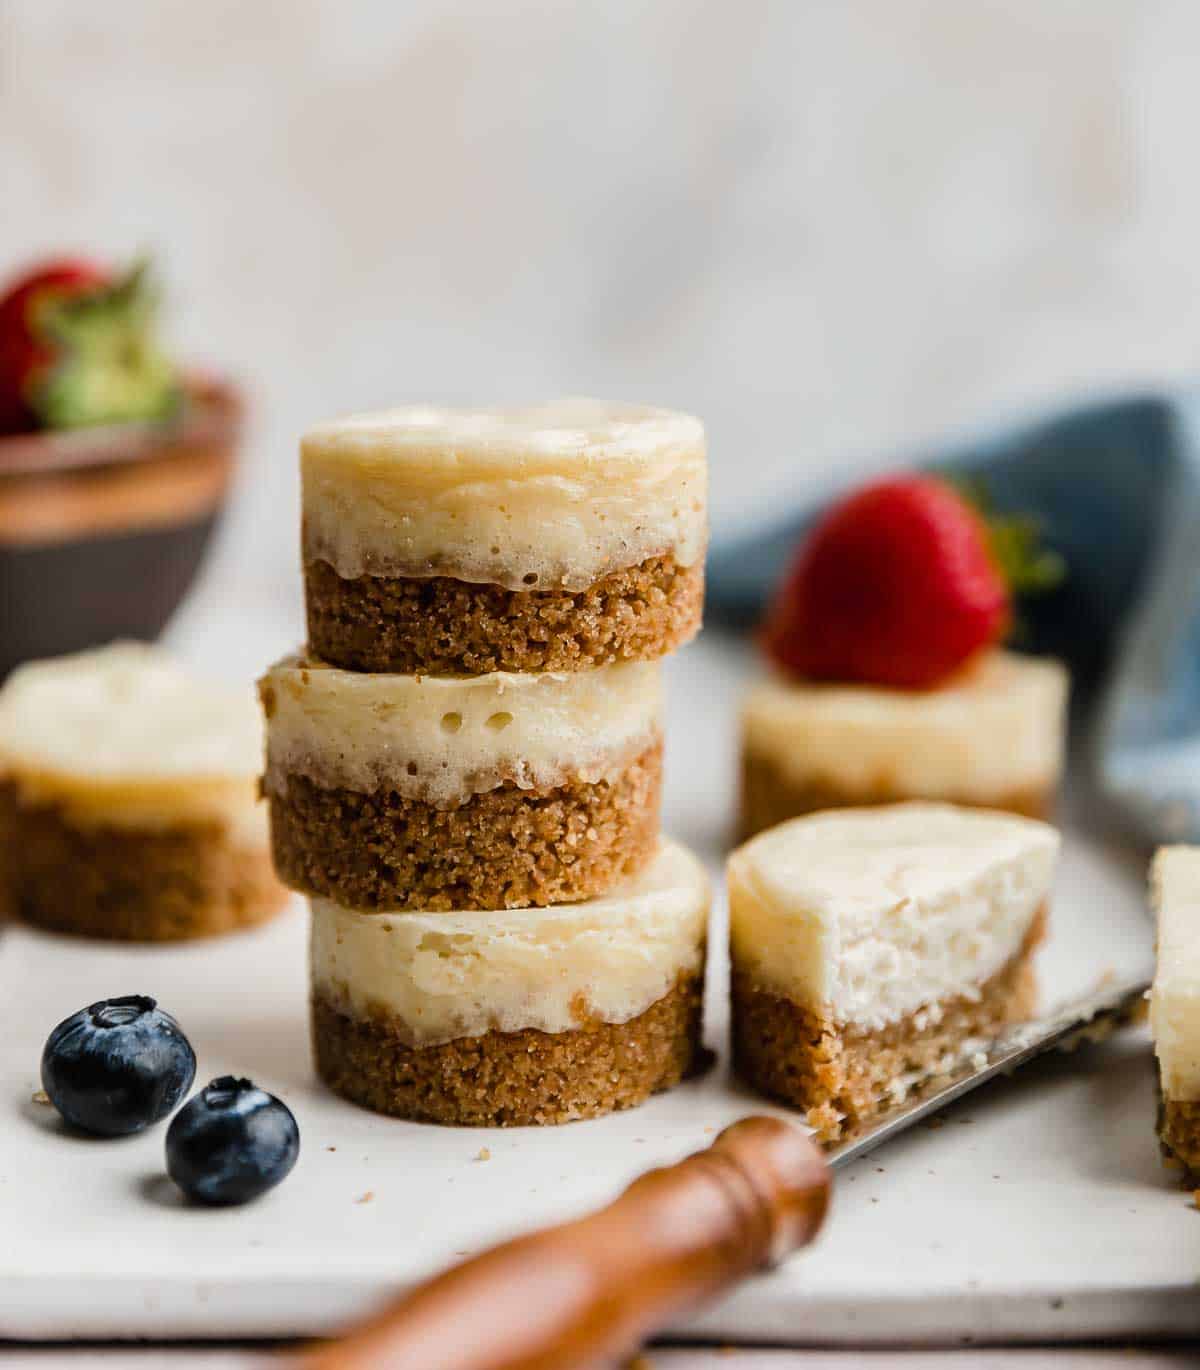 A stack of three baked mini cheesecakes against a white background.